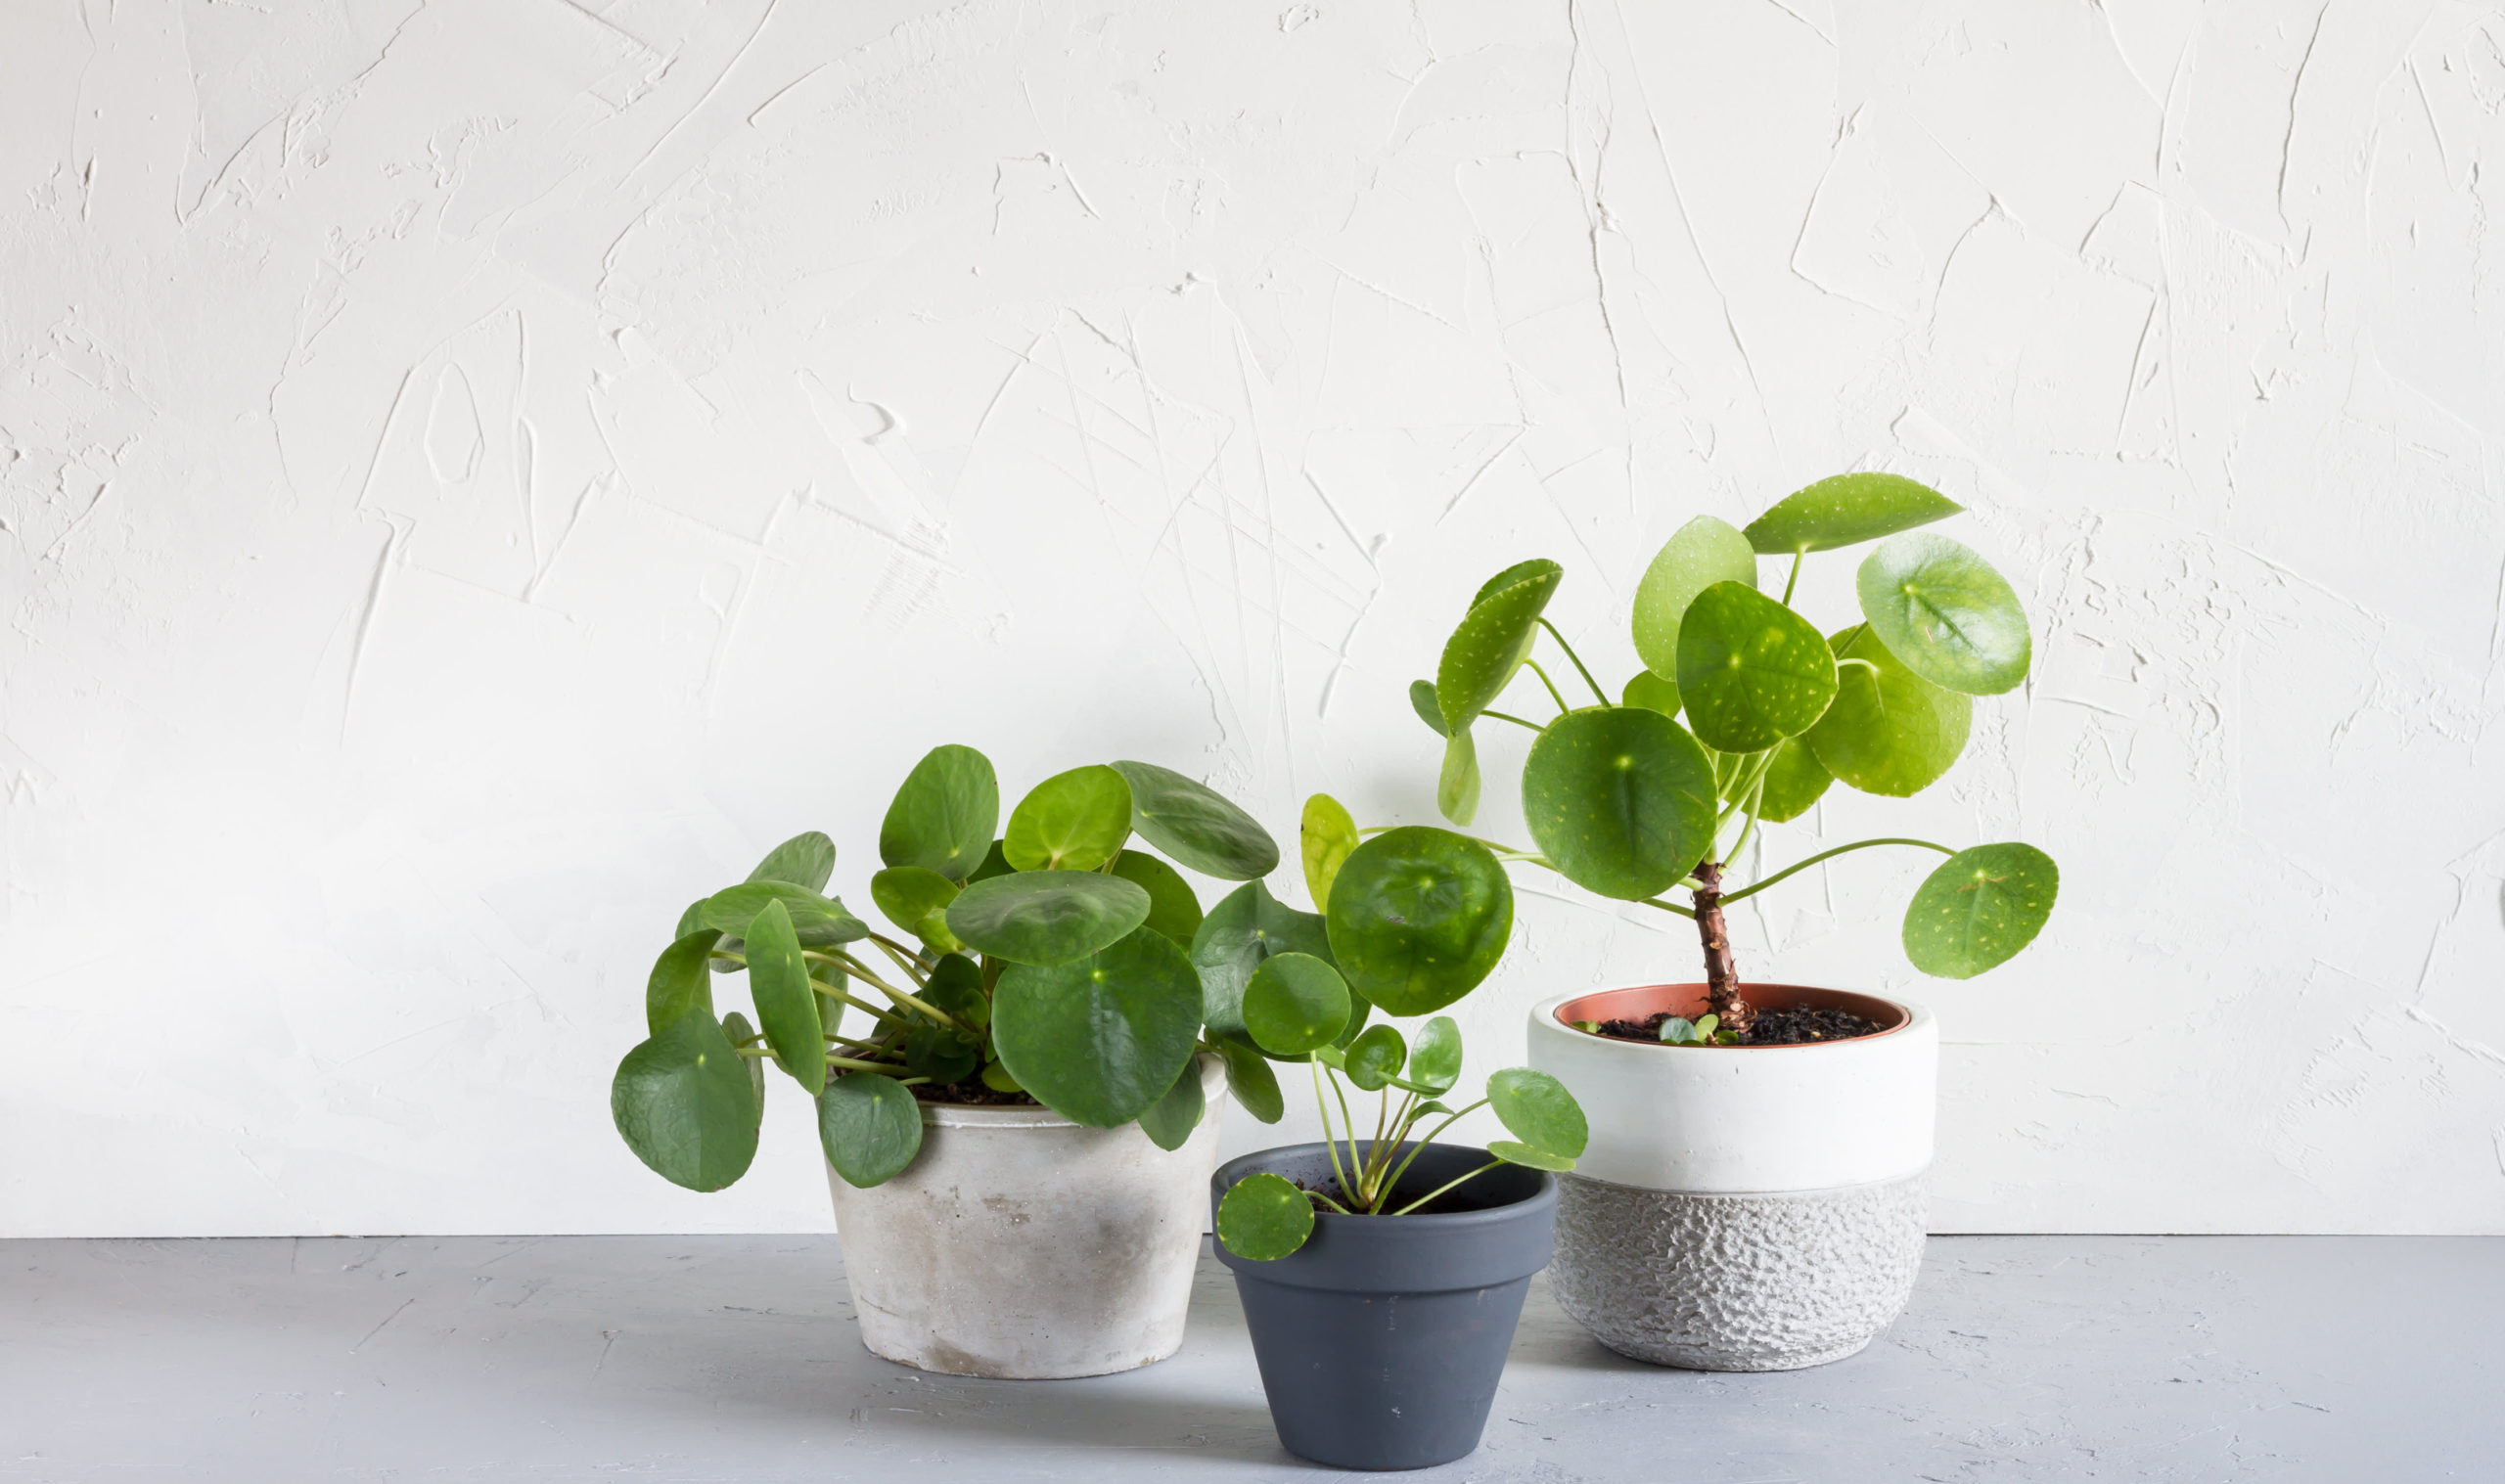 Chinese Money Plant Care - How to Grow & Maintain Pilea